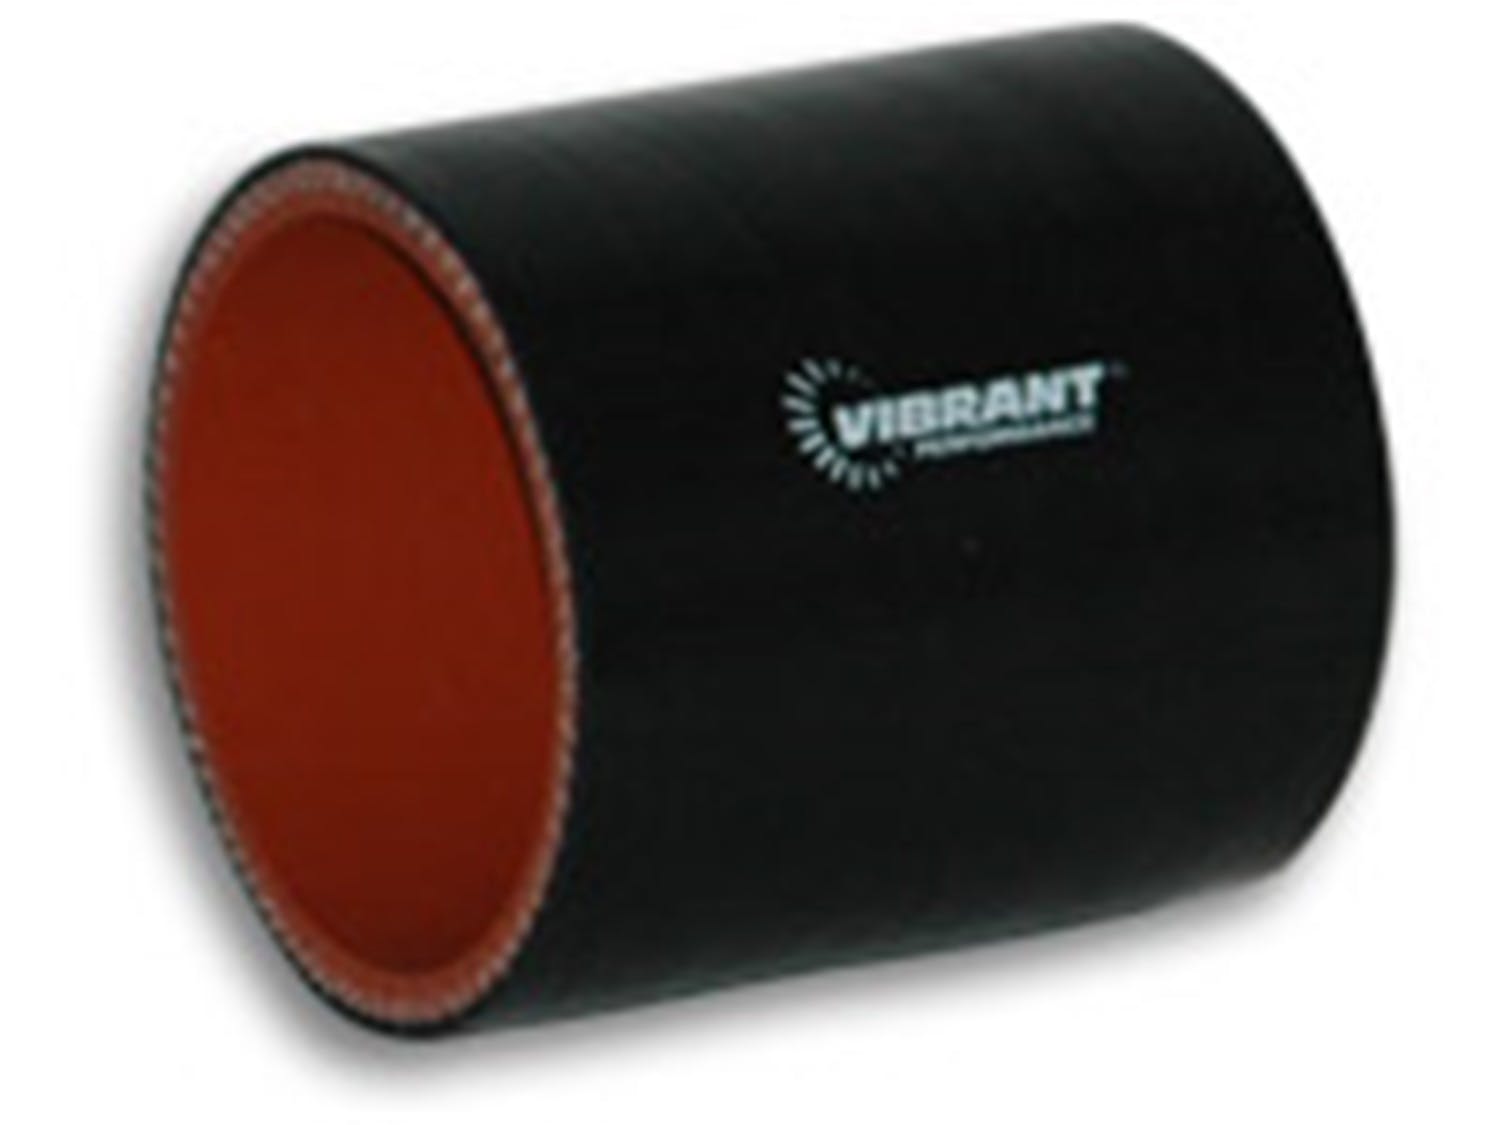 Vibrant Performance 2704 4 Ply Silicone Sleeve, 1.75 inch I.D. x 3 inch Long - Black